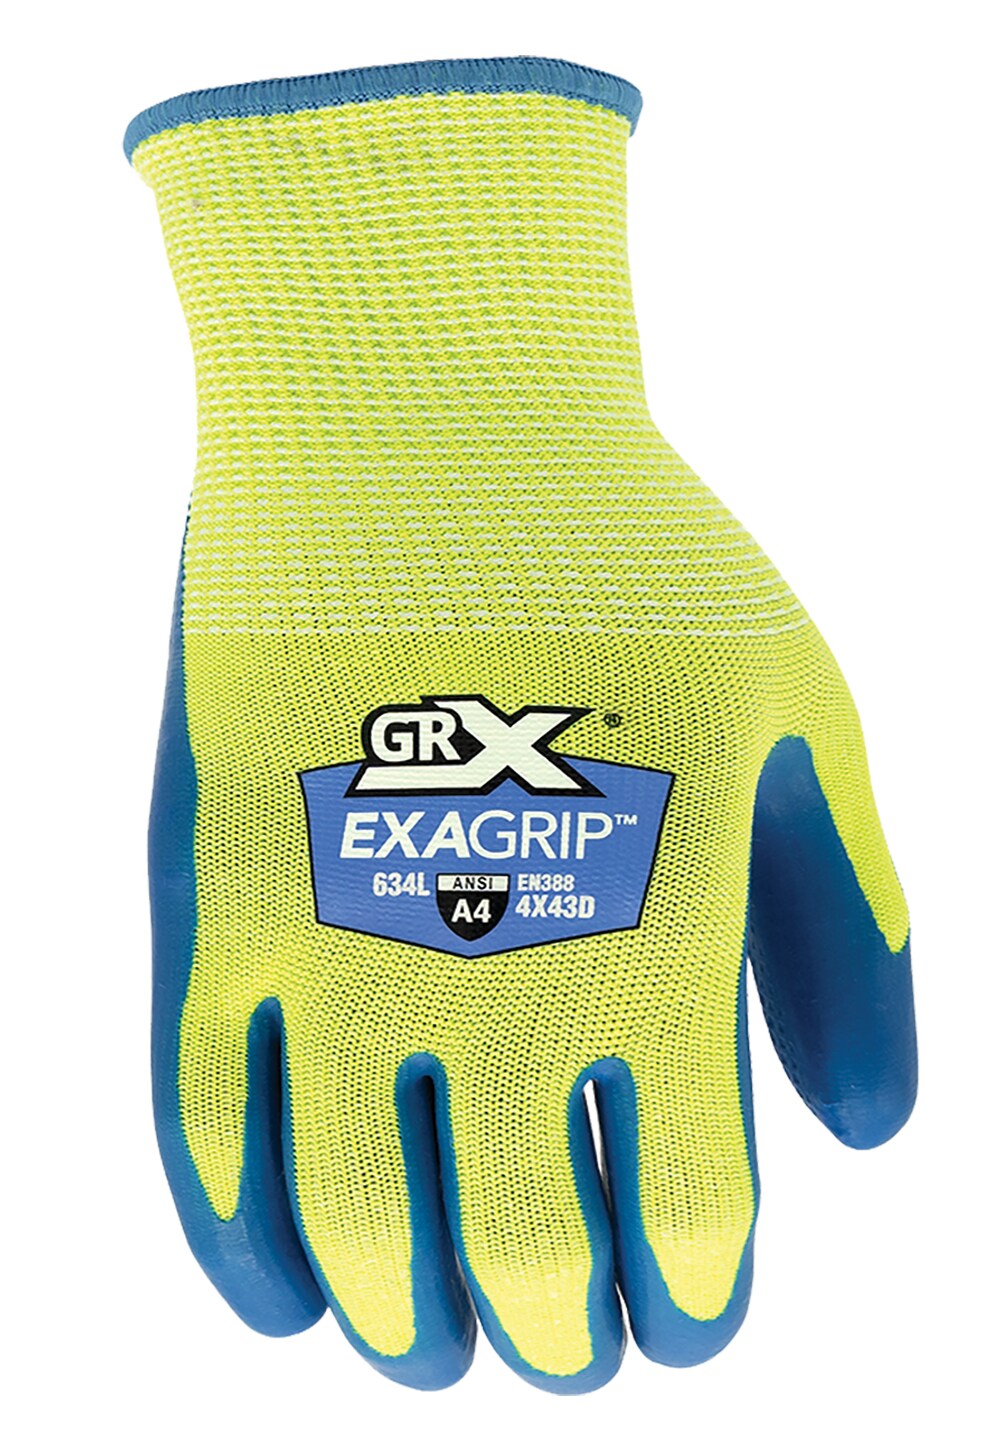 GRX Cut Series 634 Cut Resistant ExaGrip Coated Palm Work Gloves in Size L